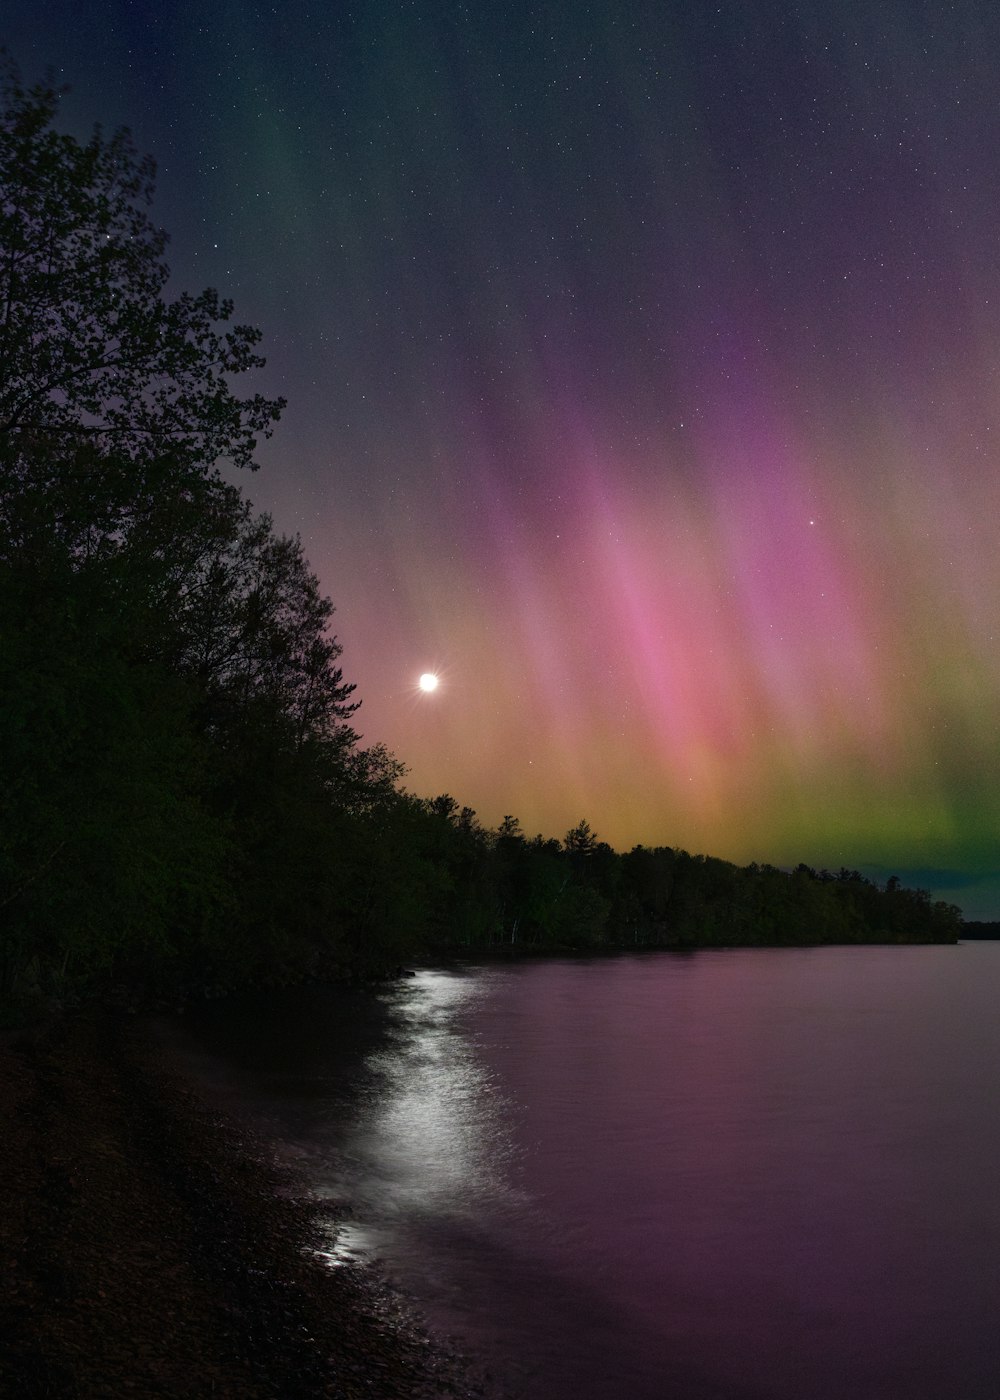 a purple and green aurora bore over a body of water